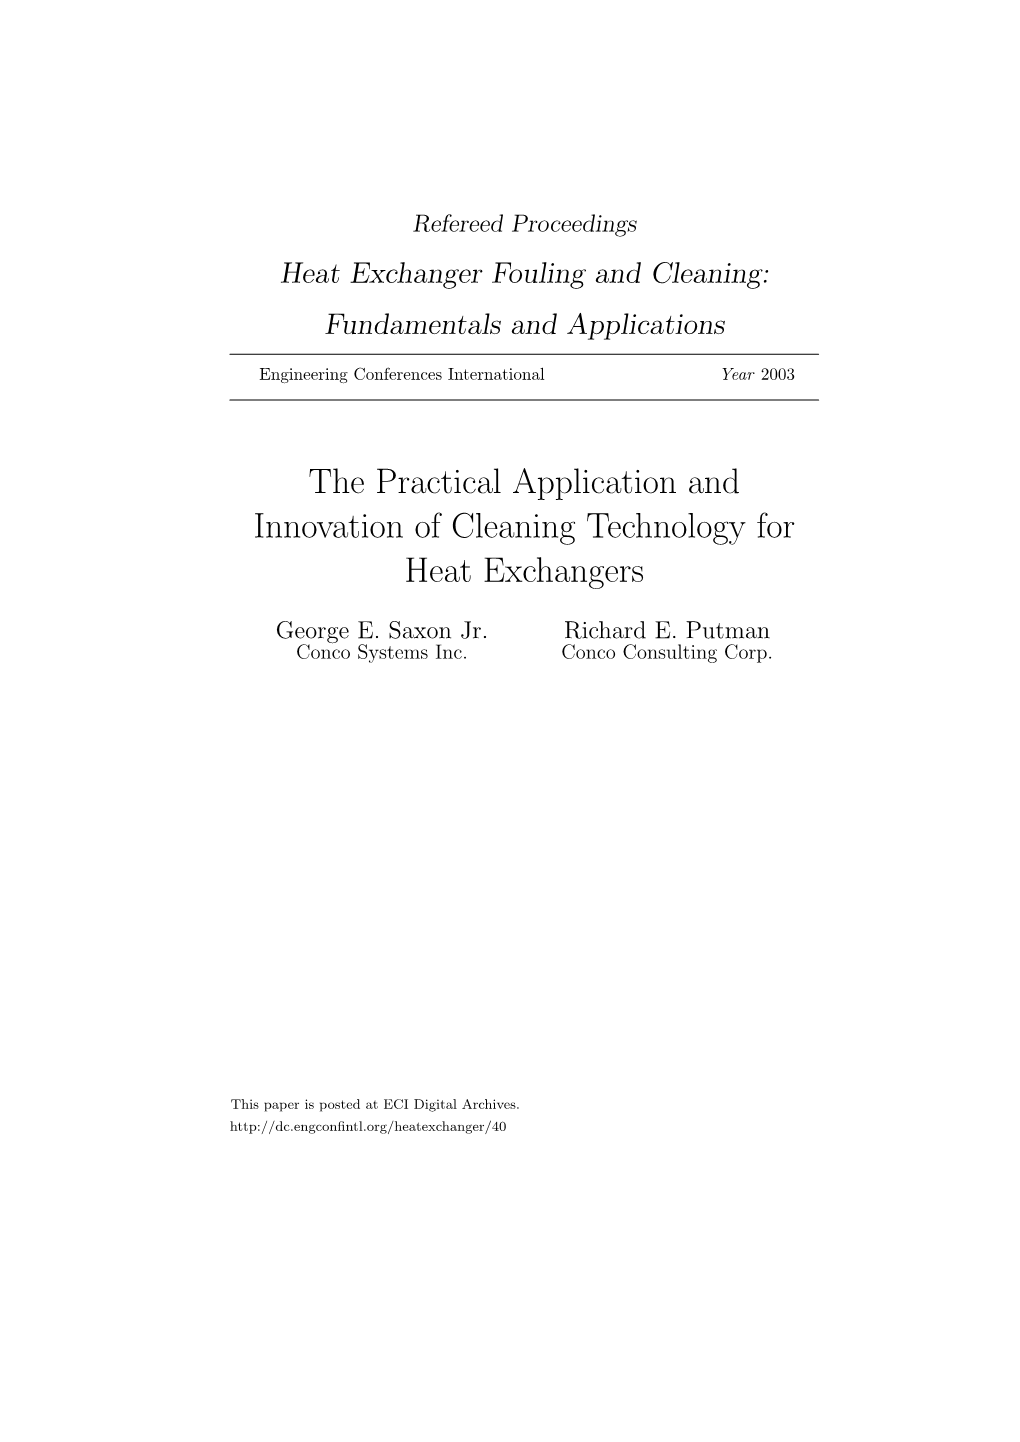 The Practical Application and Innovation of Cleaning Technology for Heat Exchangers